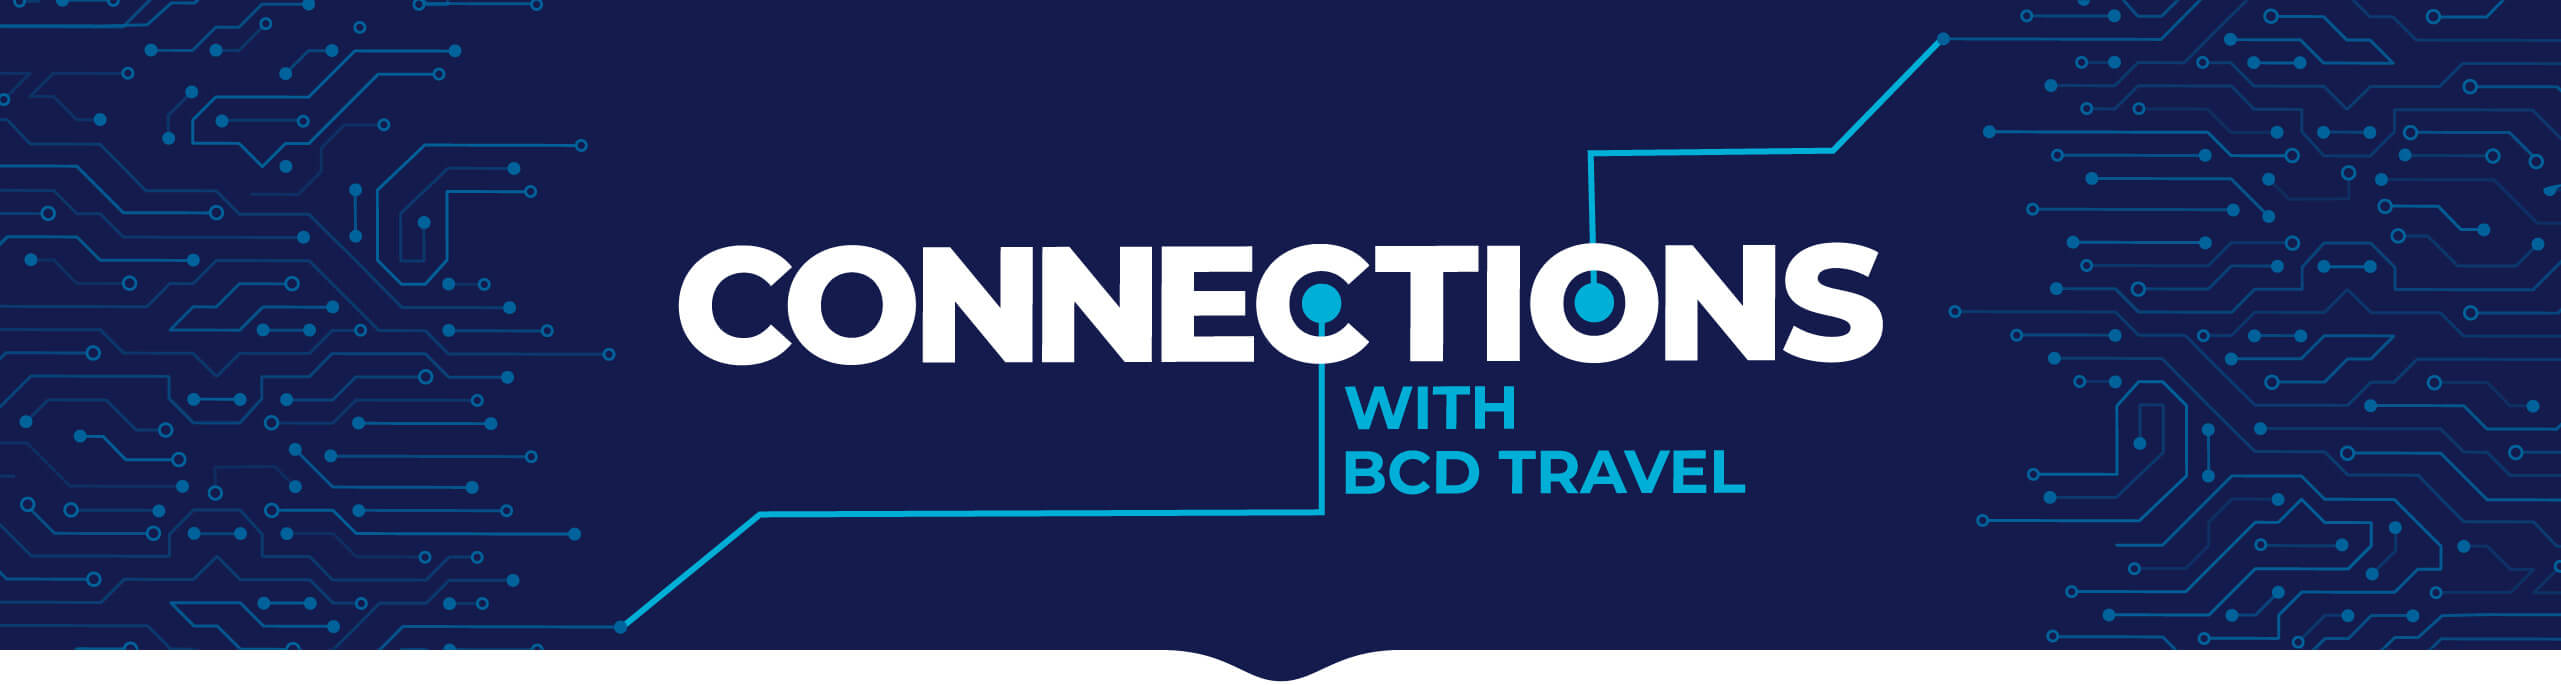 Connects with BCD Travel